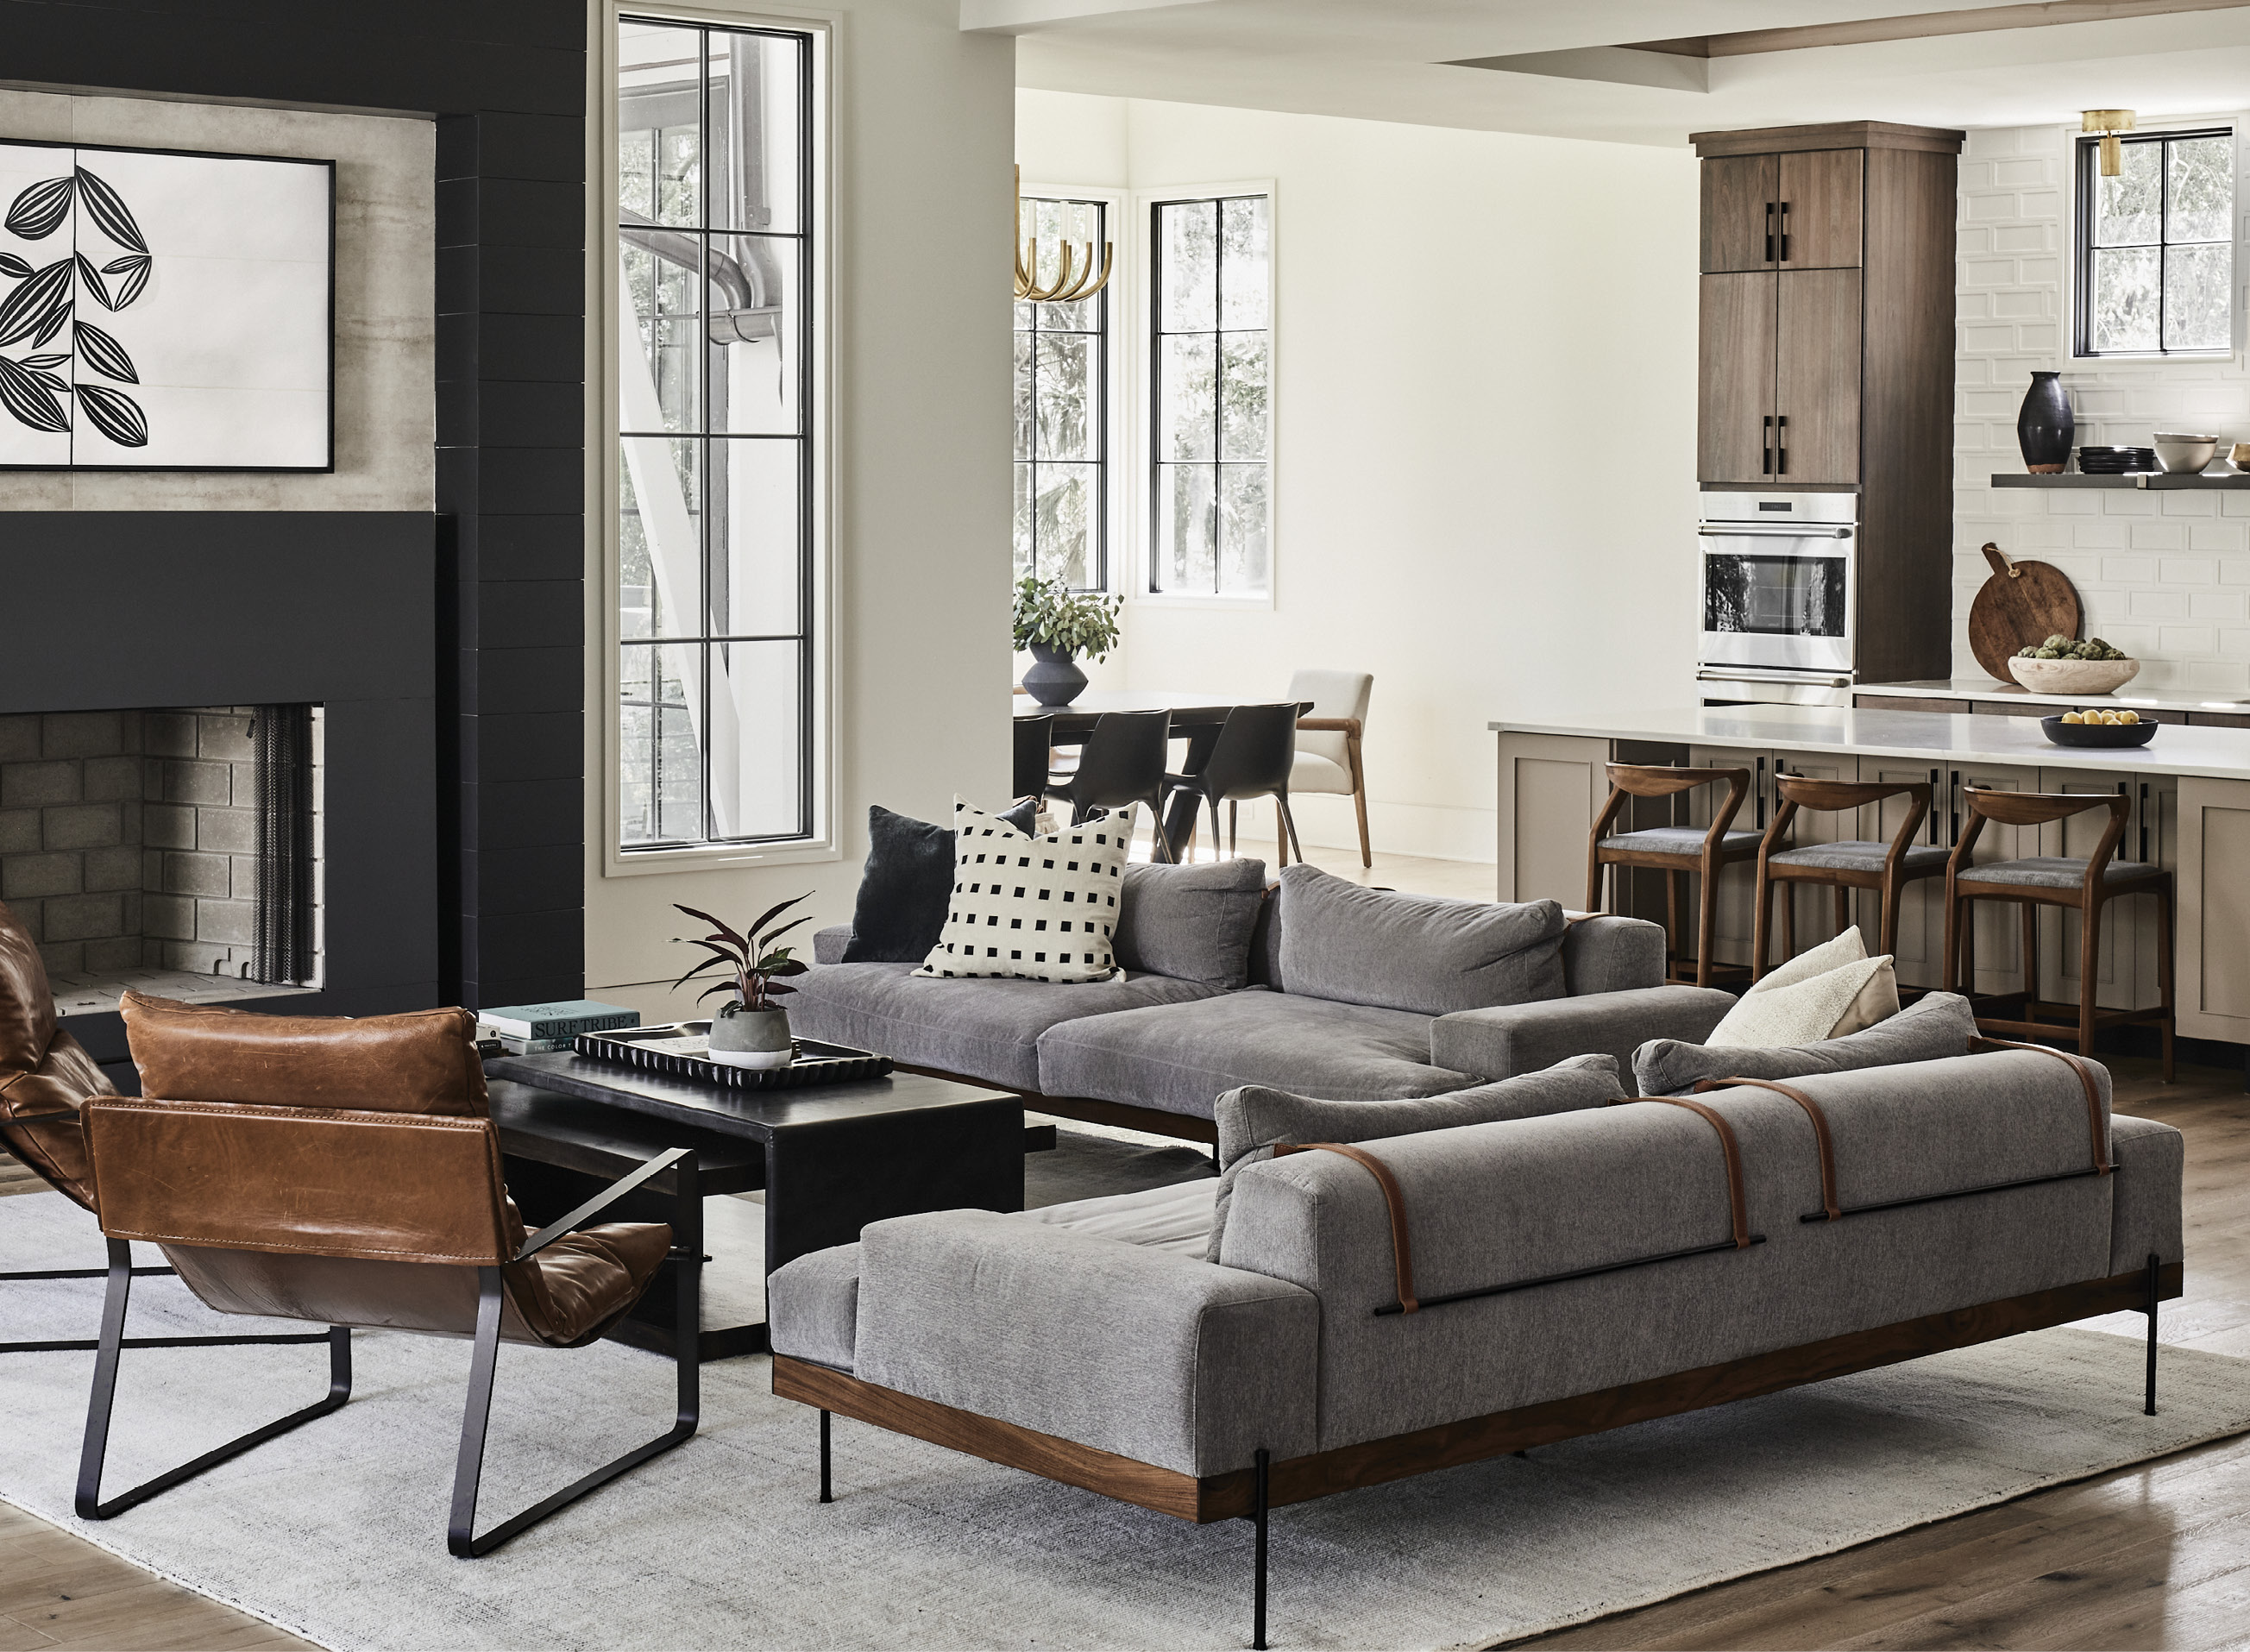 Anchored by a steel-wrapped fireplace surround with large-format tile above the mantel, the living space features low-profile iron and walnut sofas upholstered with a family-friendly performance fabric. A large wool rug helps define the space.